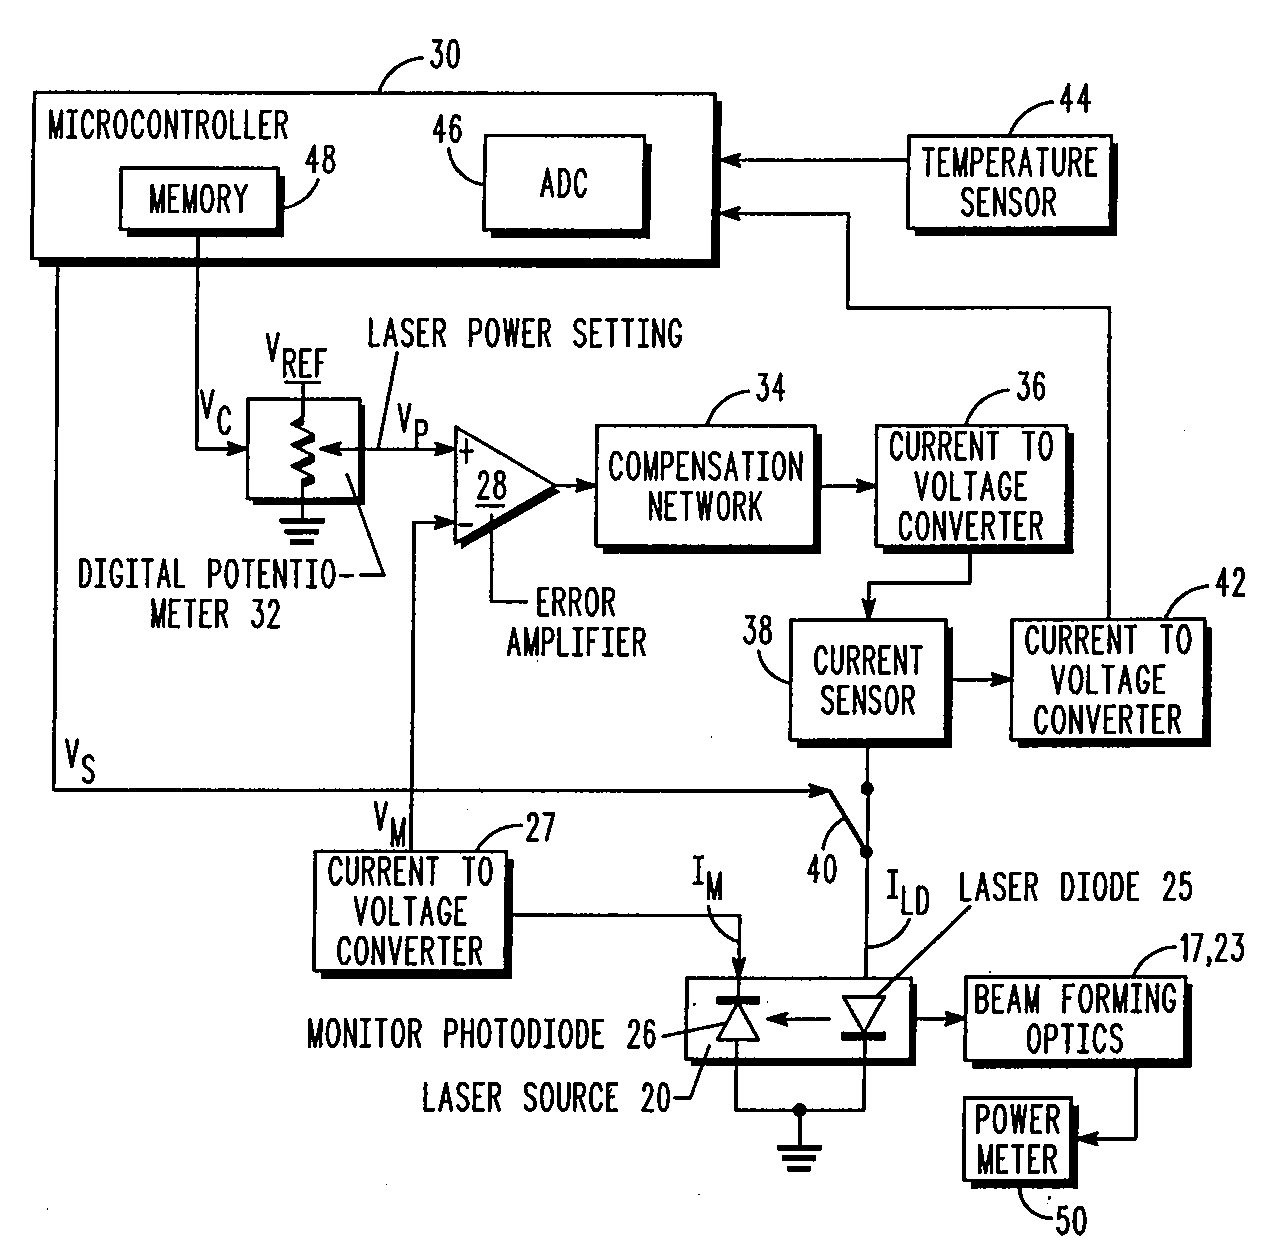 Method and apparatus for controlling and monitoring laser power in barcode readers